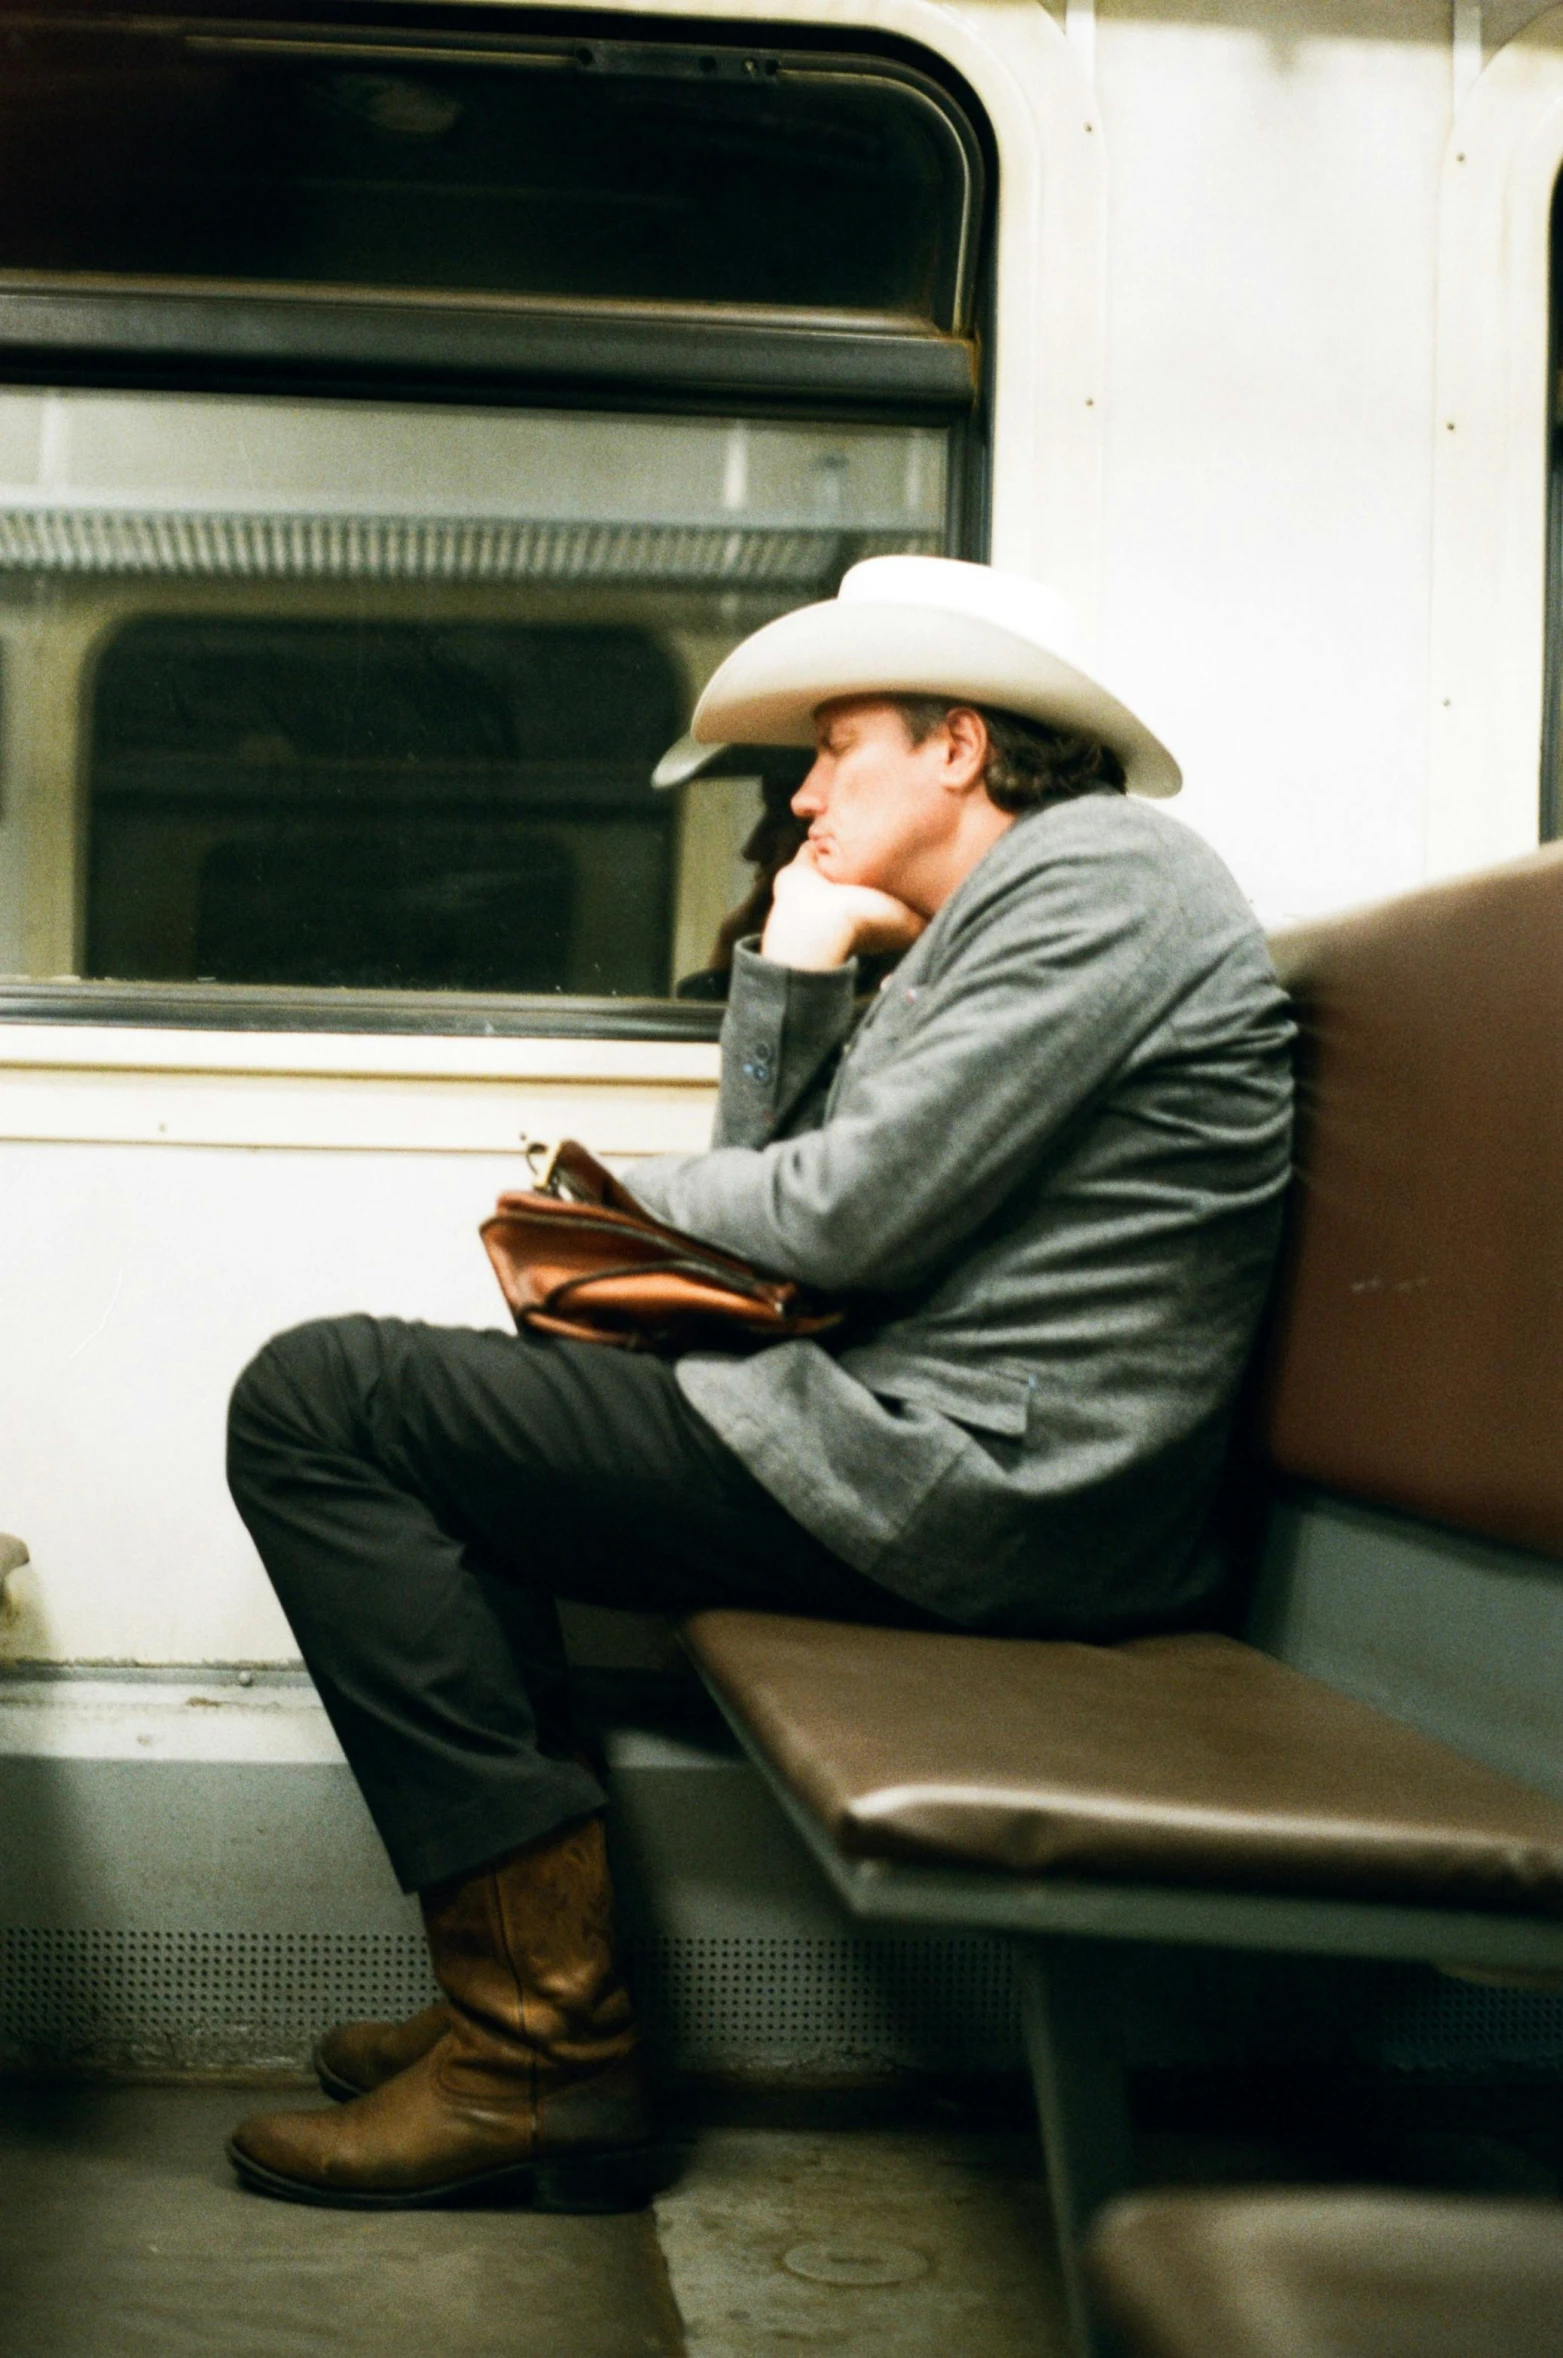 a man sitting on a subway train with his head down